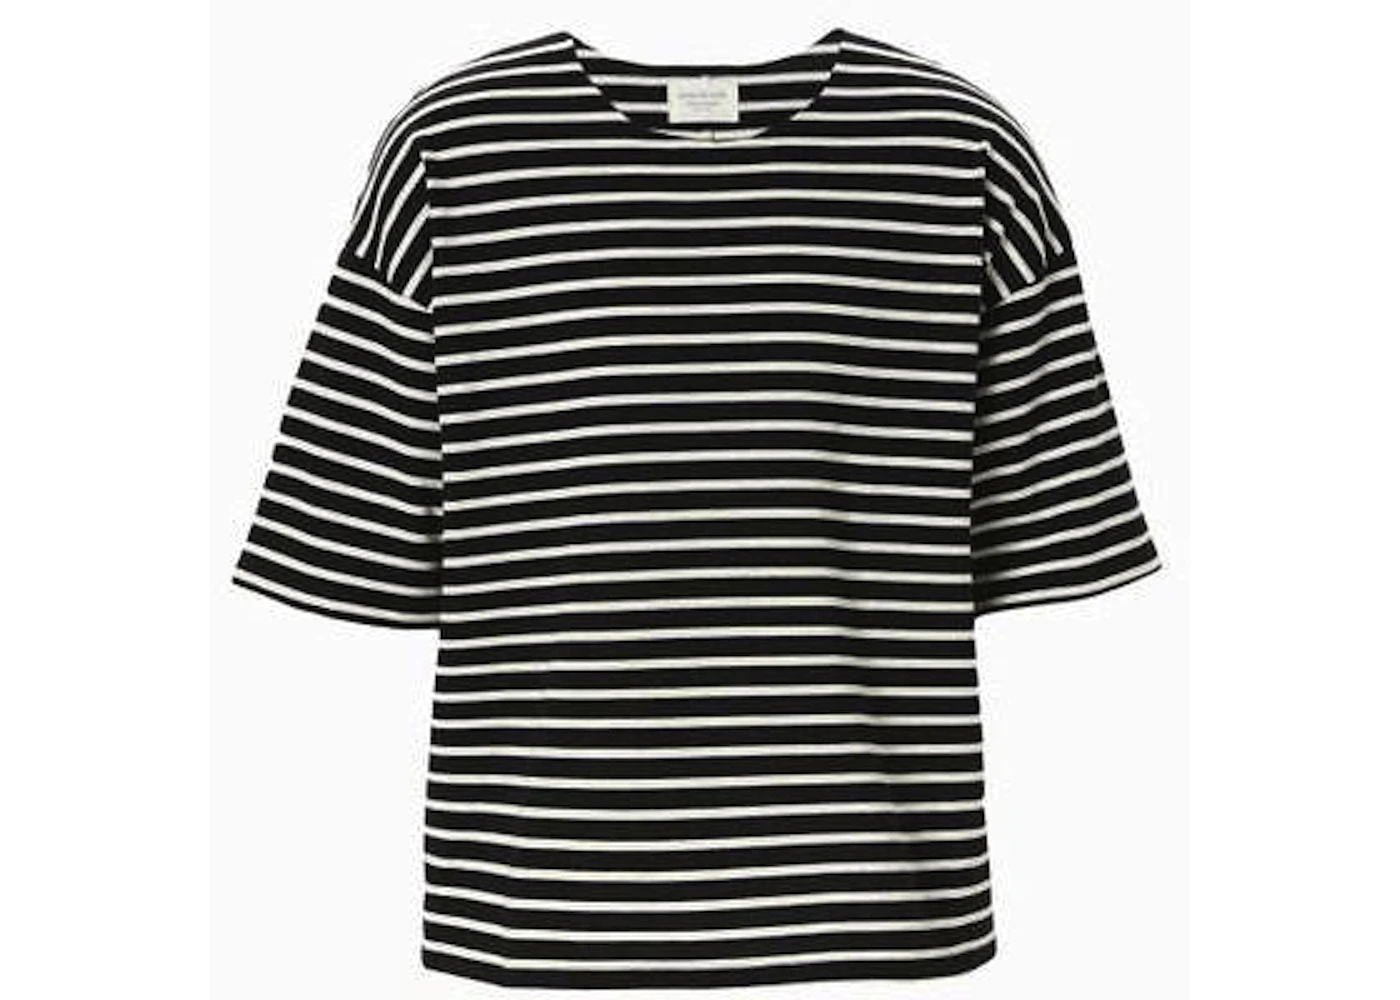 FEAR OF GOD Striped Crew T-shirt Black Stripe Men's - Fourth Collection ...